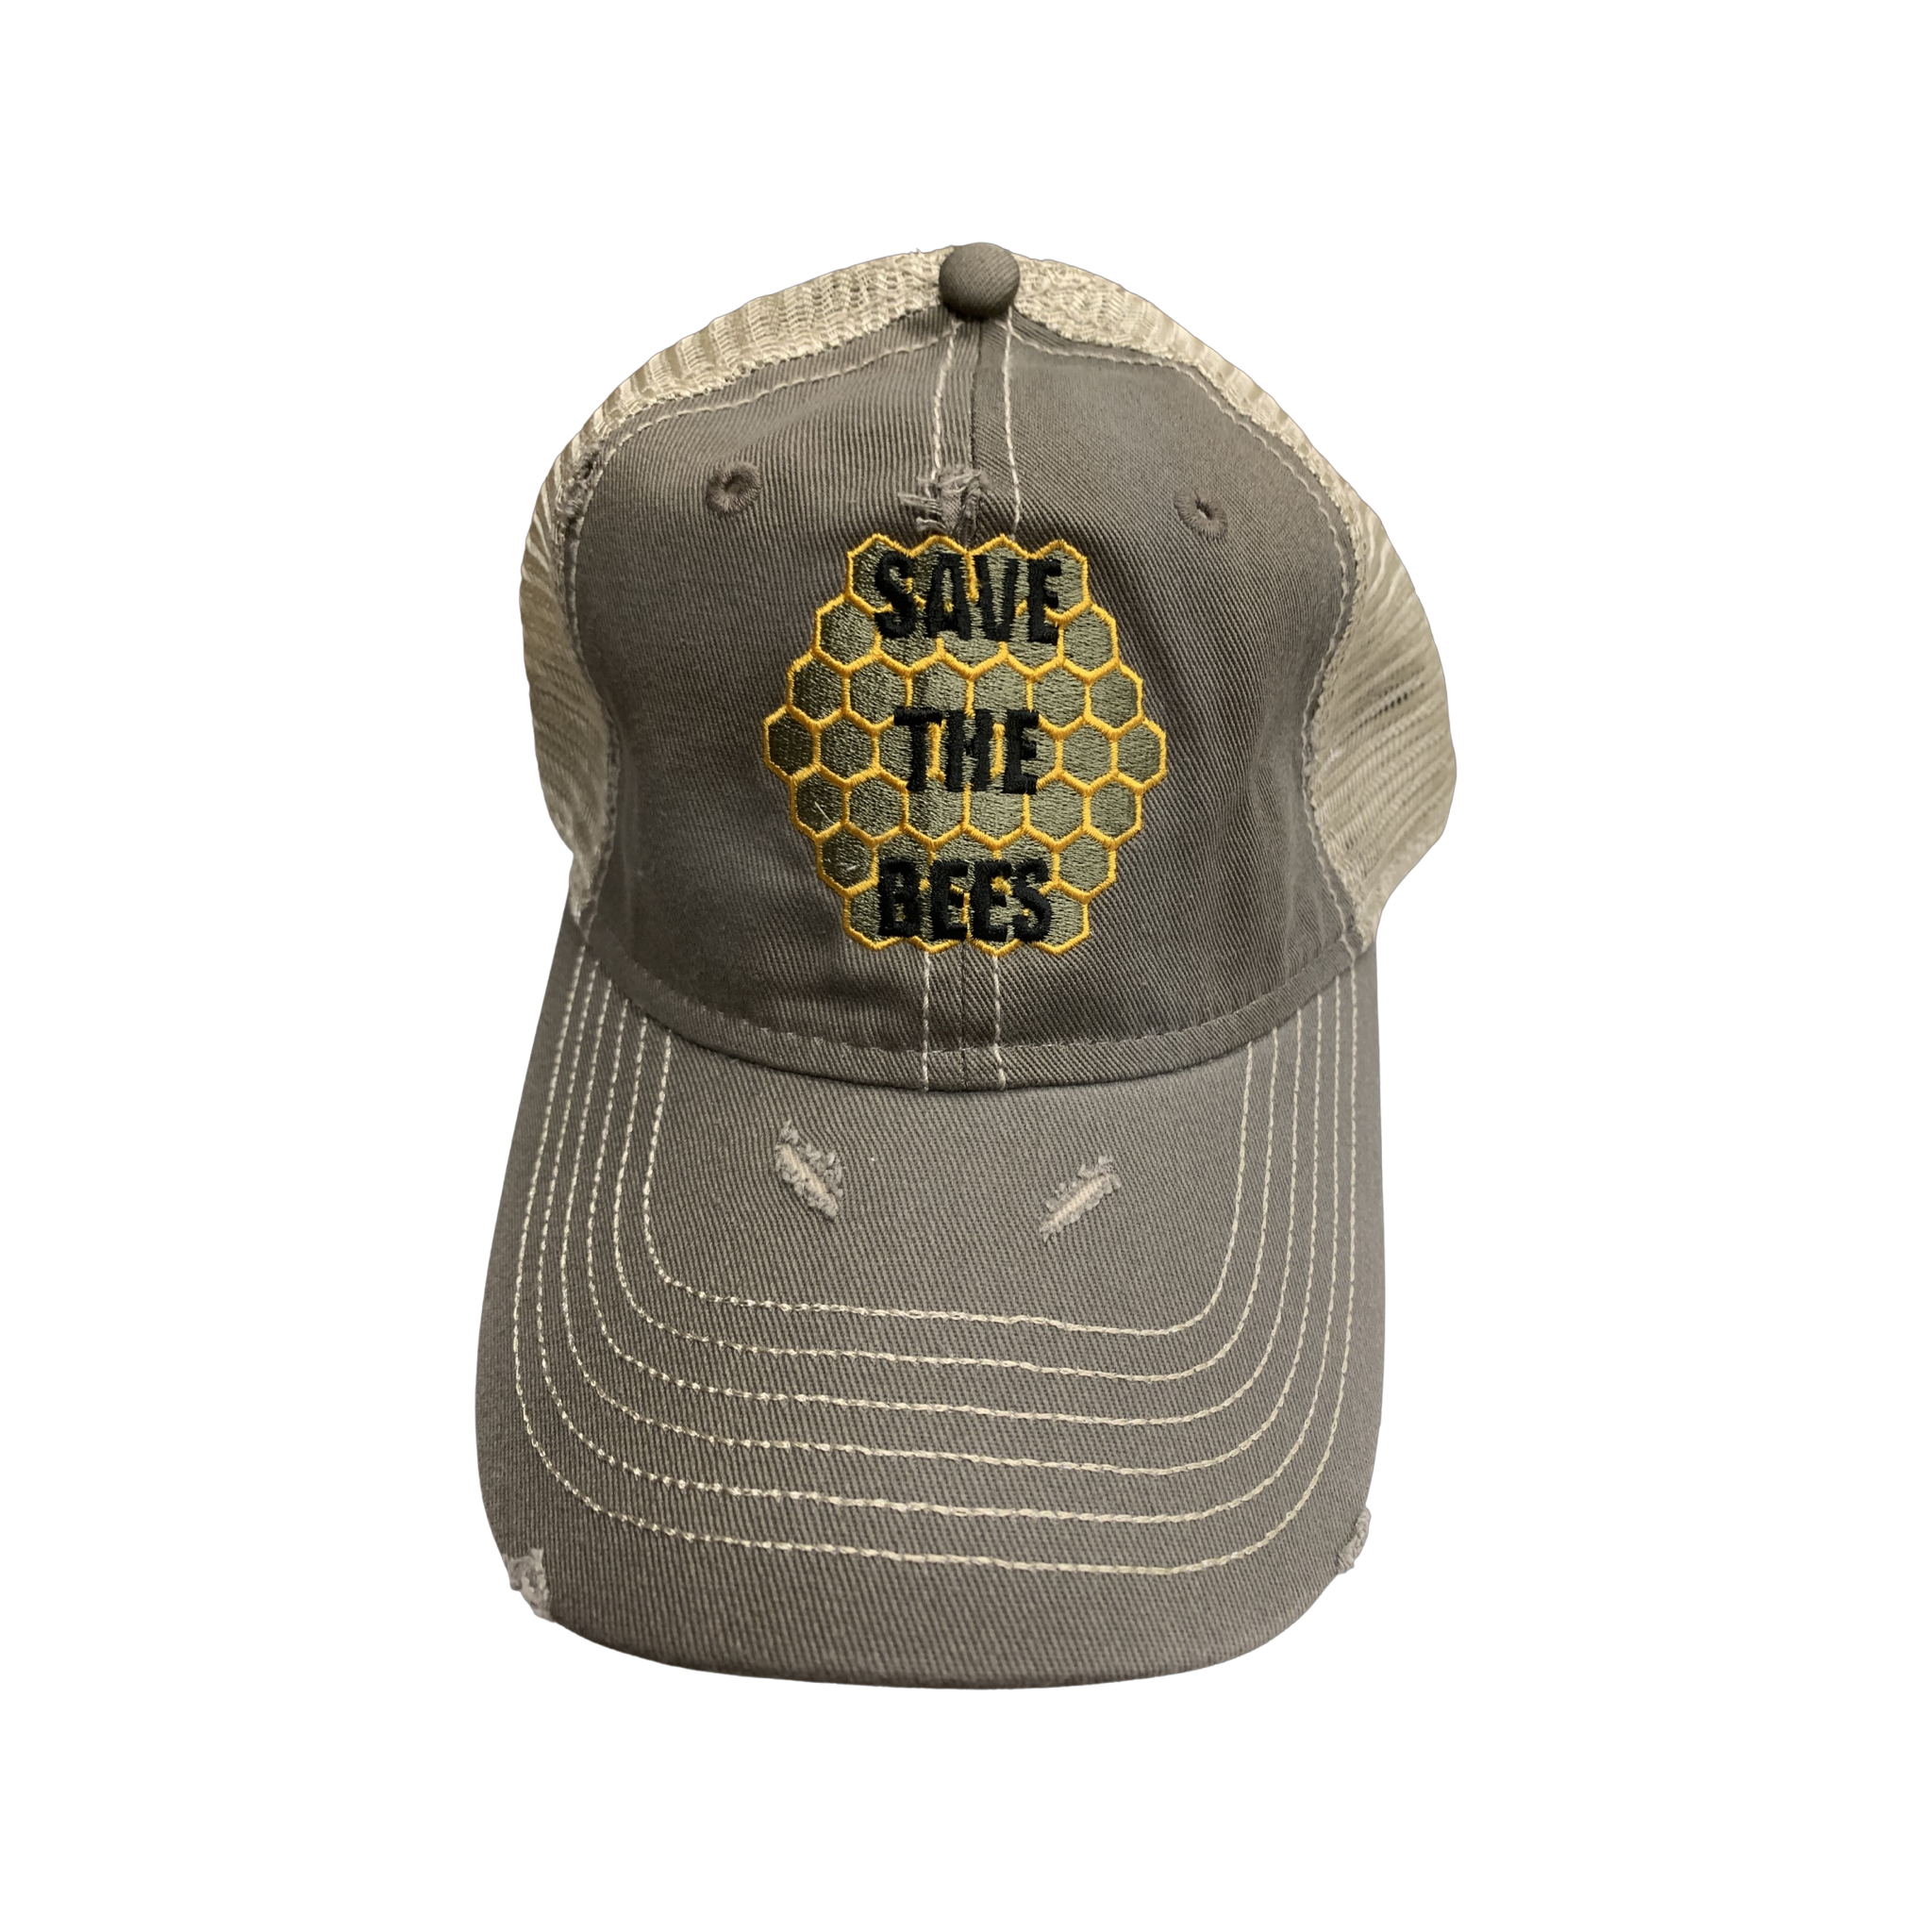 Save the bees hat.